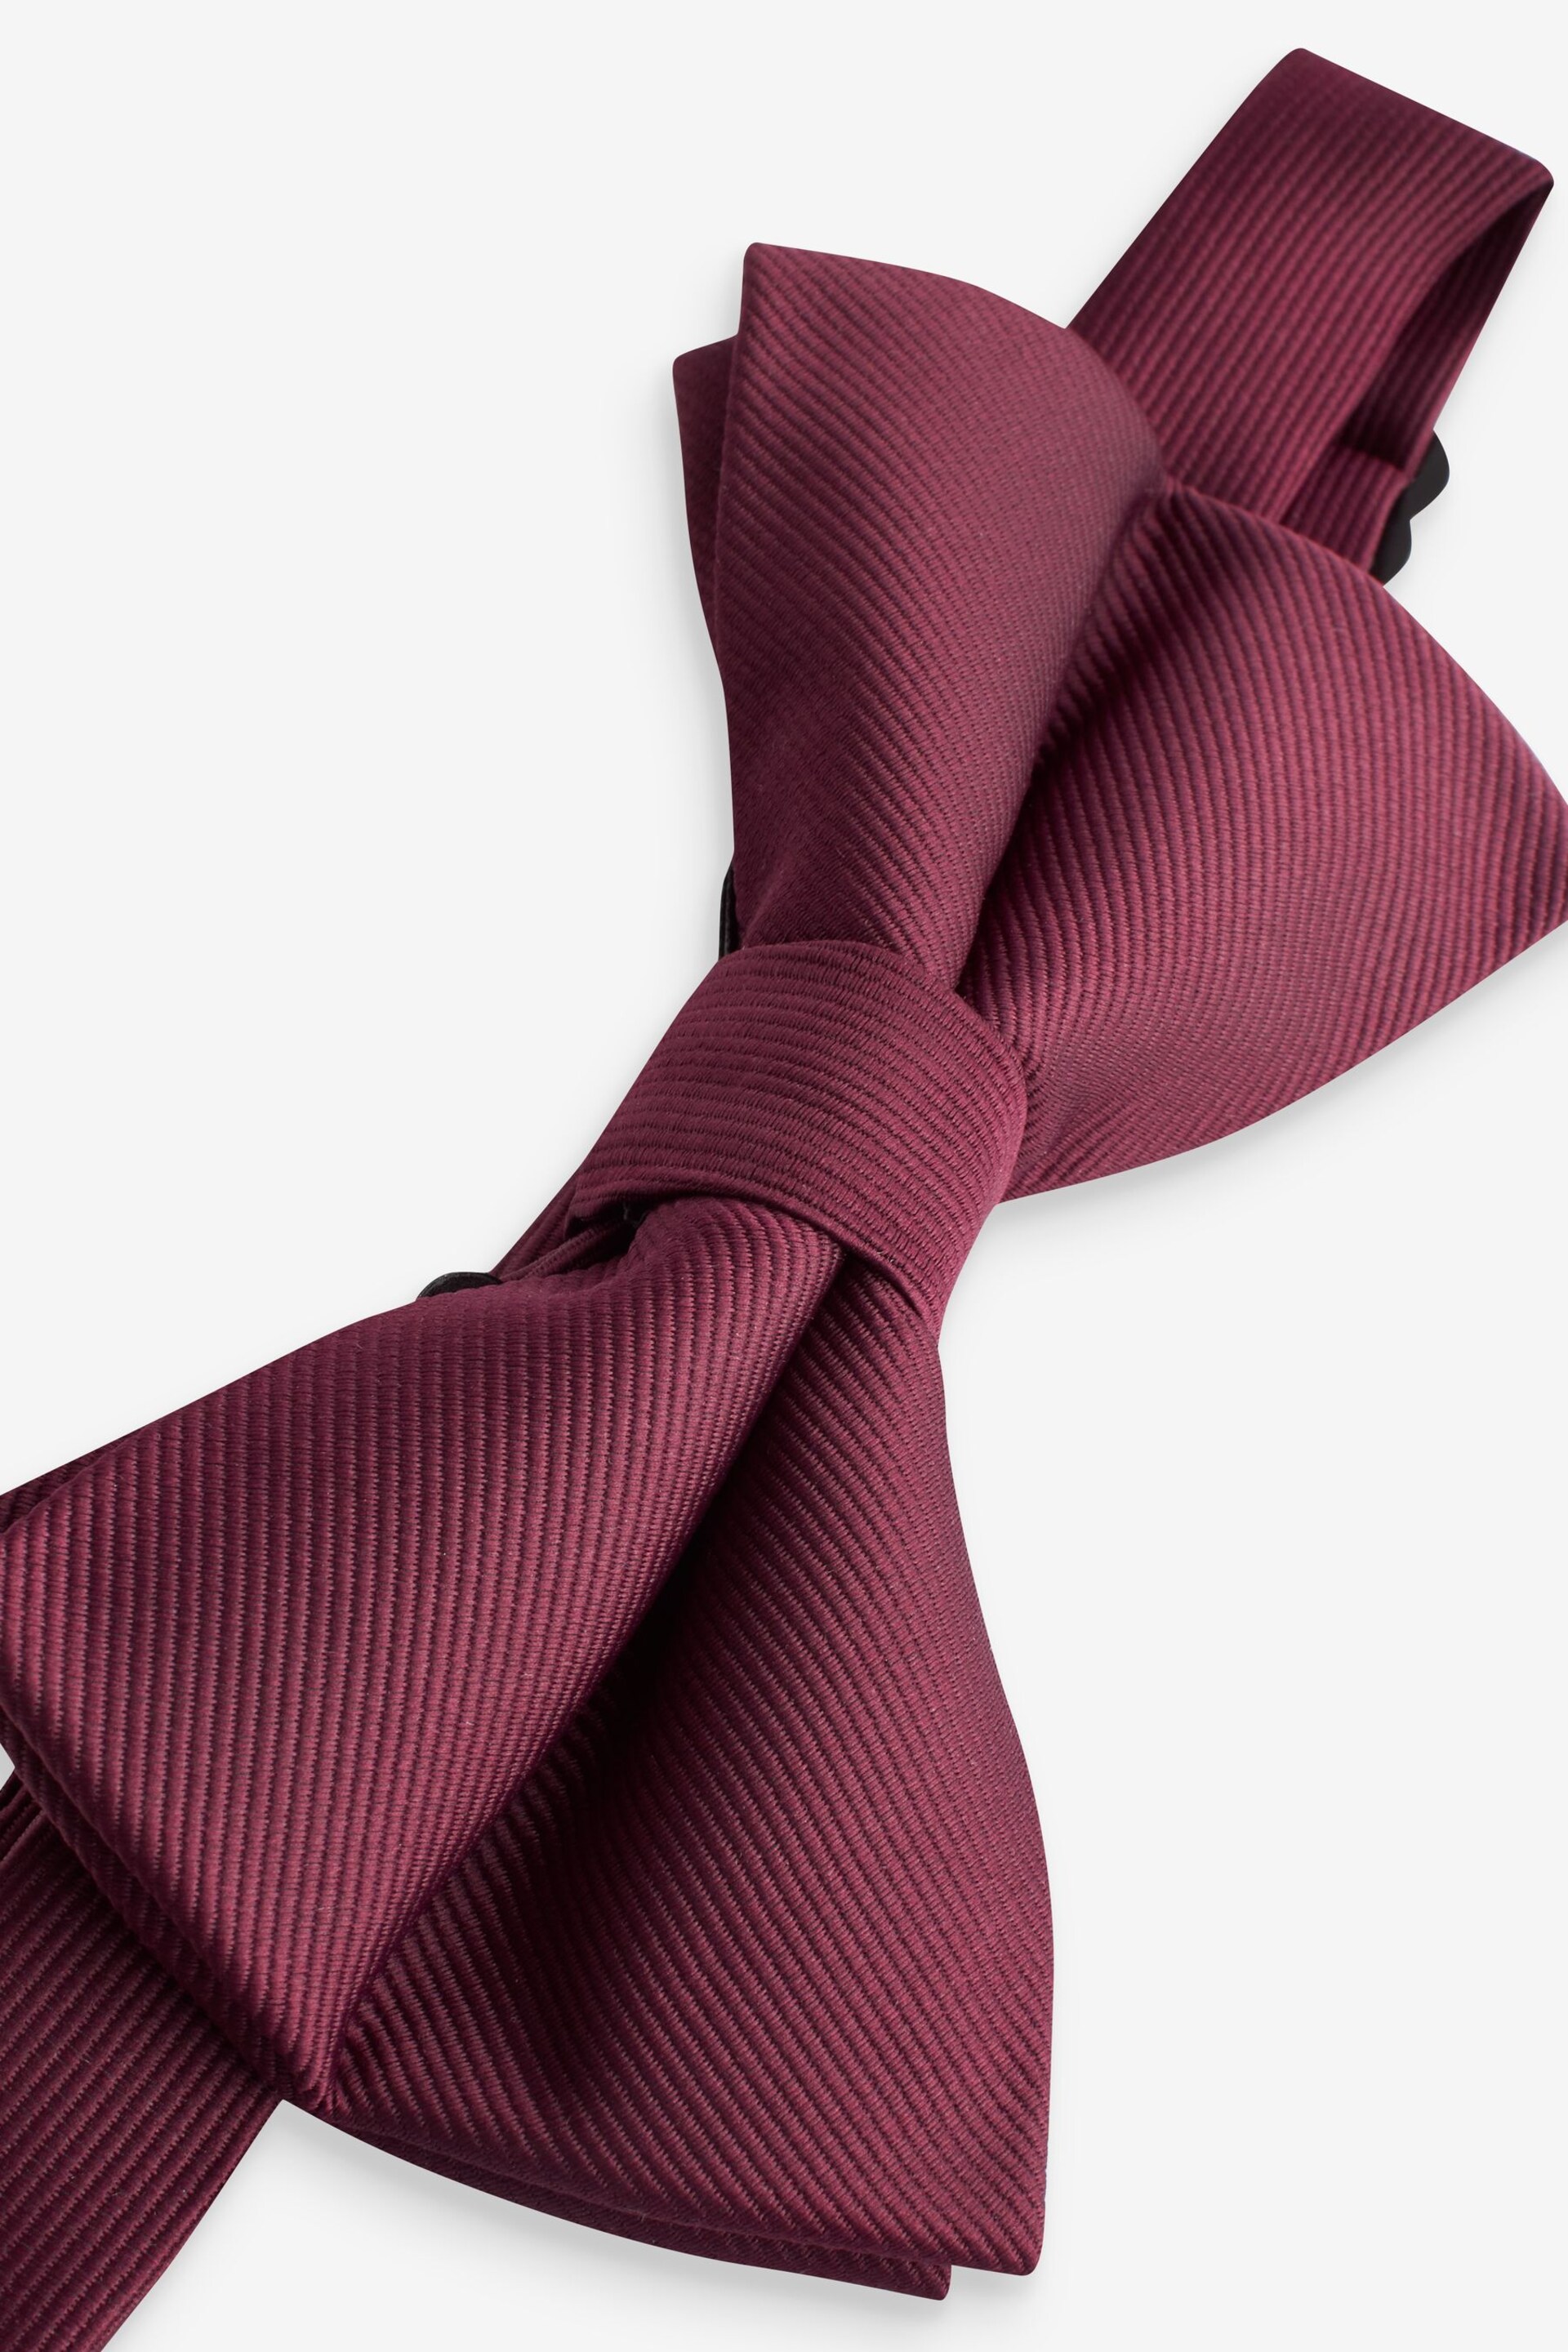 Burgundy Red Recycled Polyester Twill Bow Tie - Image 6 of 7